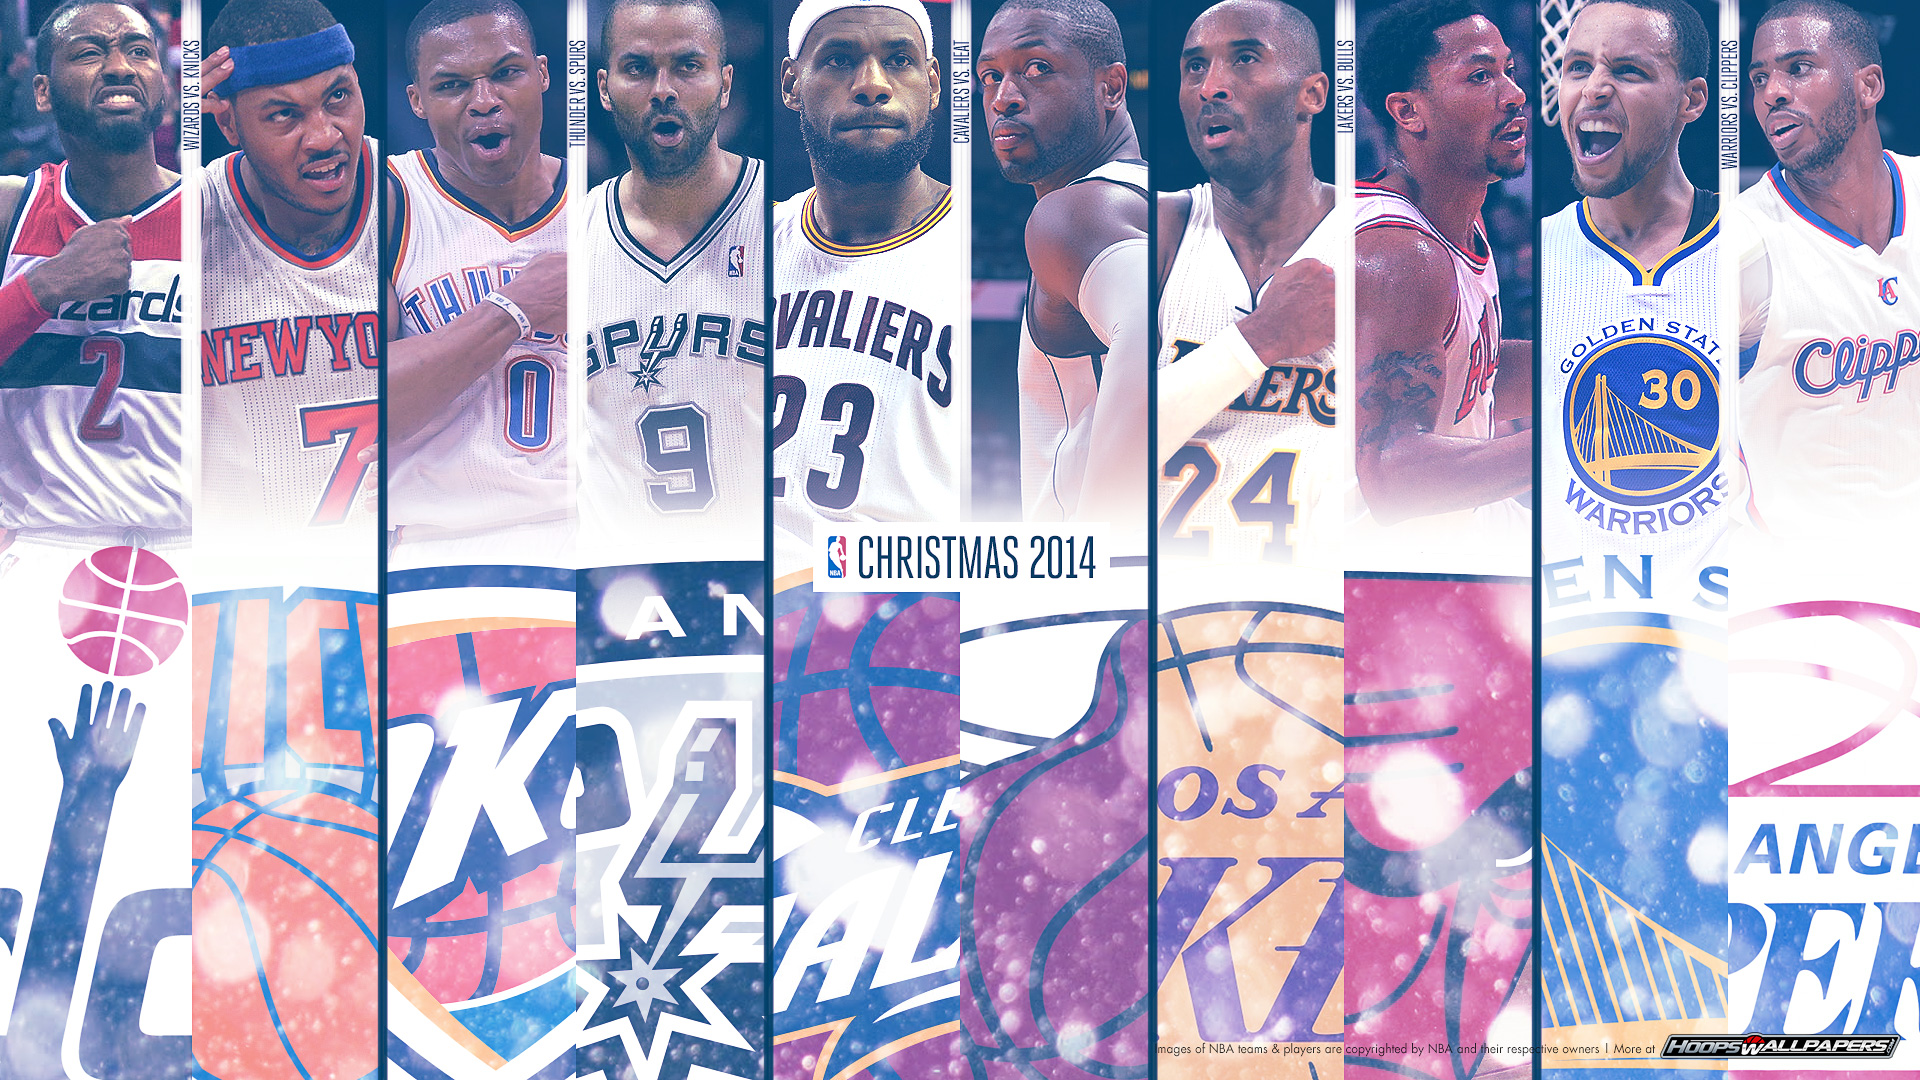 Nba Wallpaper Click On The Image For Full HD Resolution